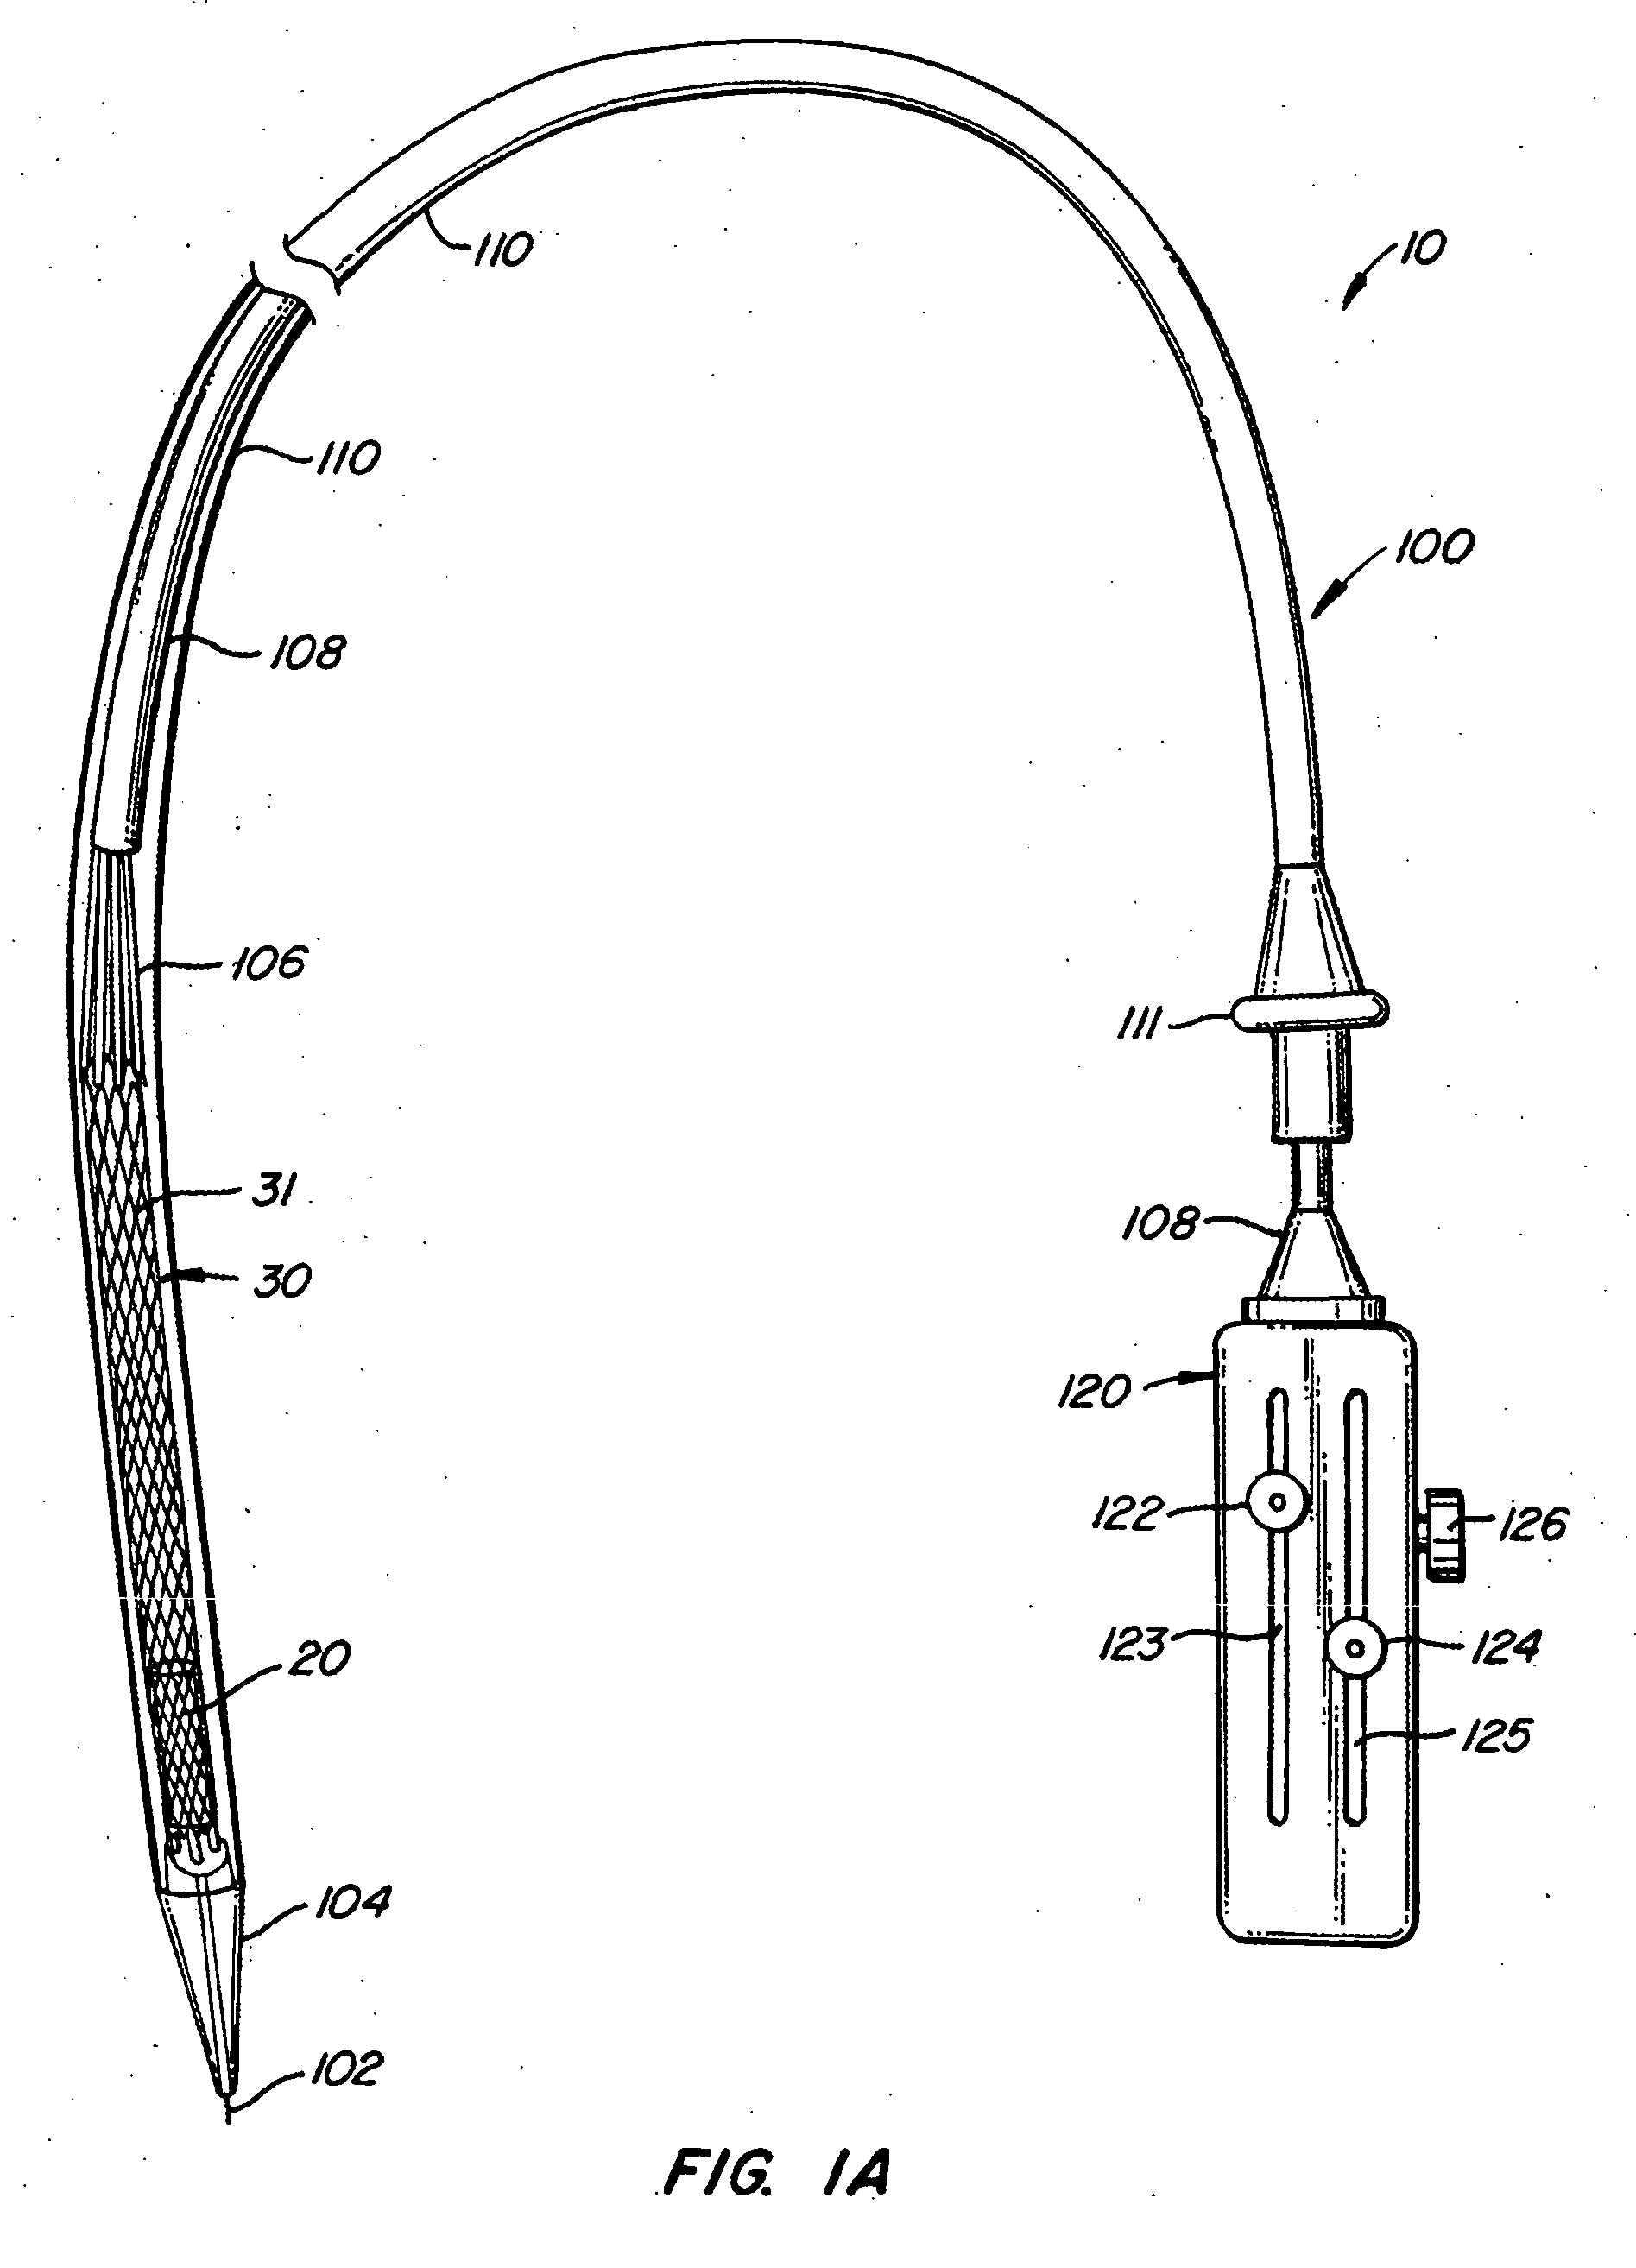 Methods and apparatus for endovascularly replacing a patient's heart valve